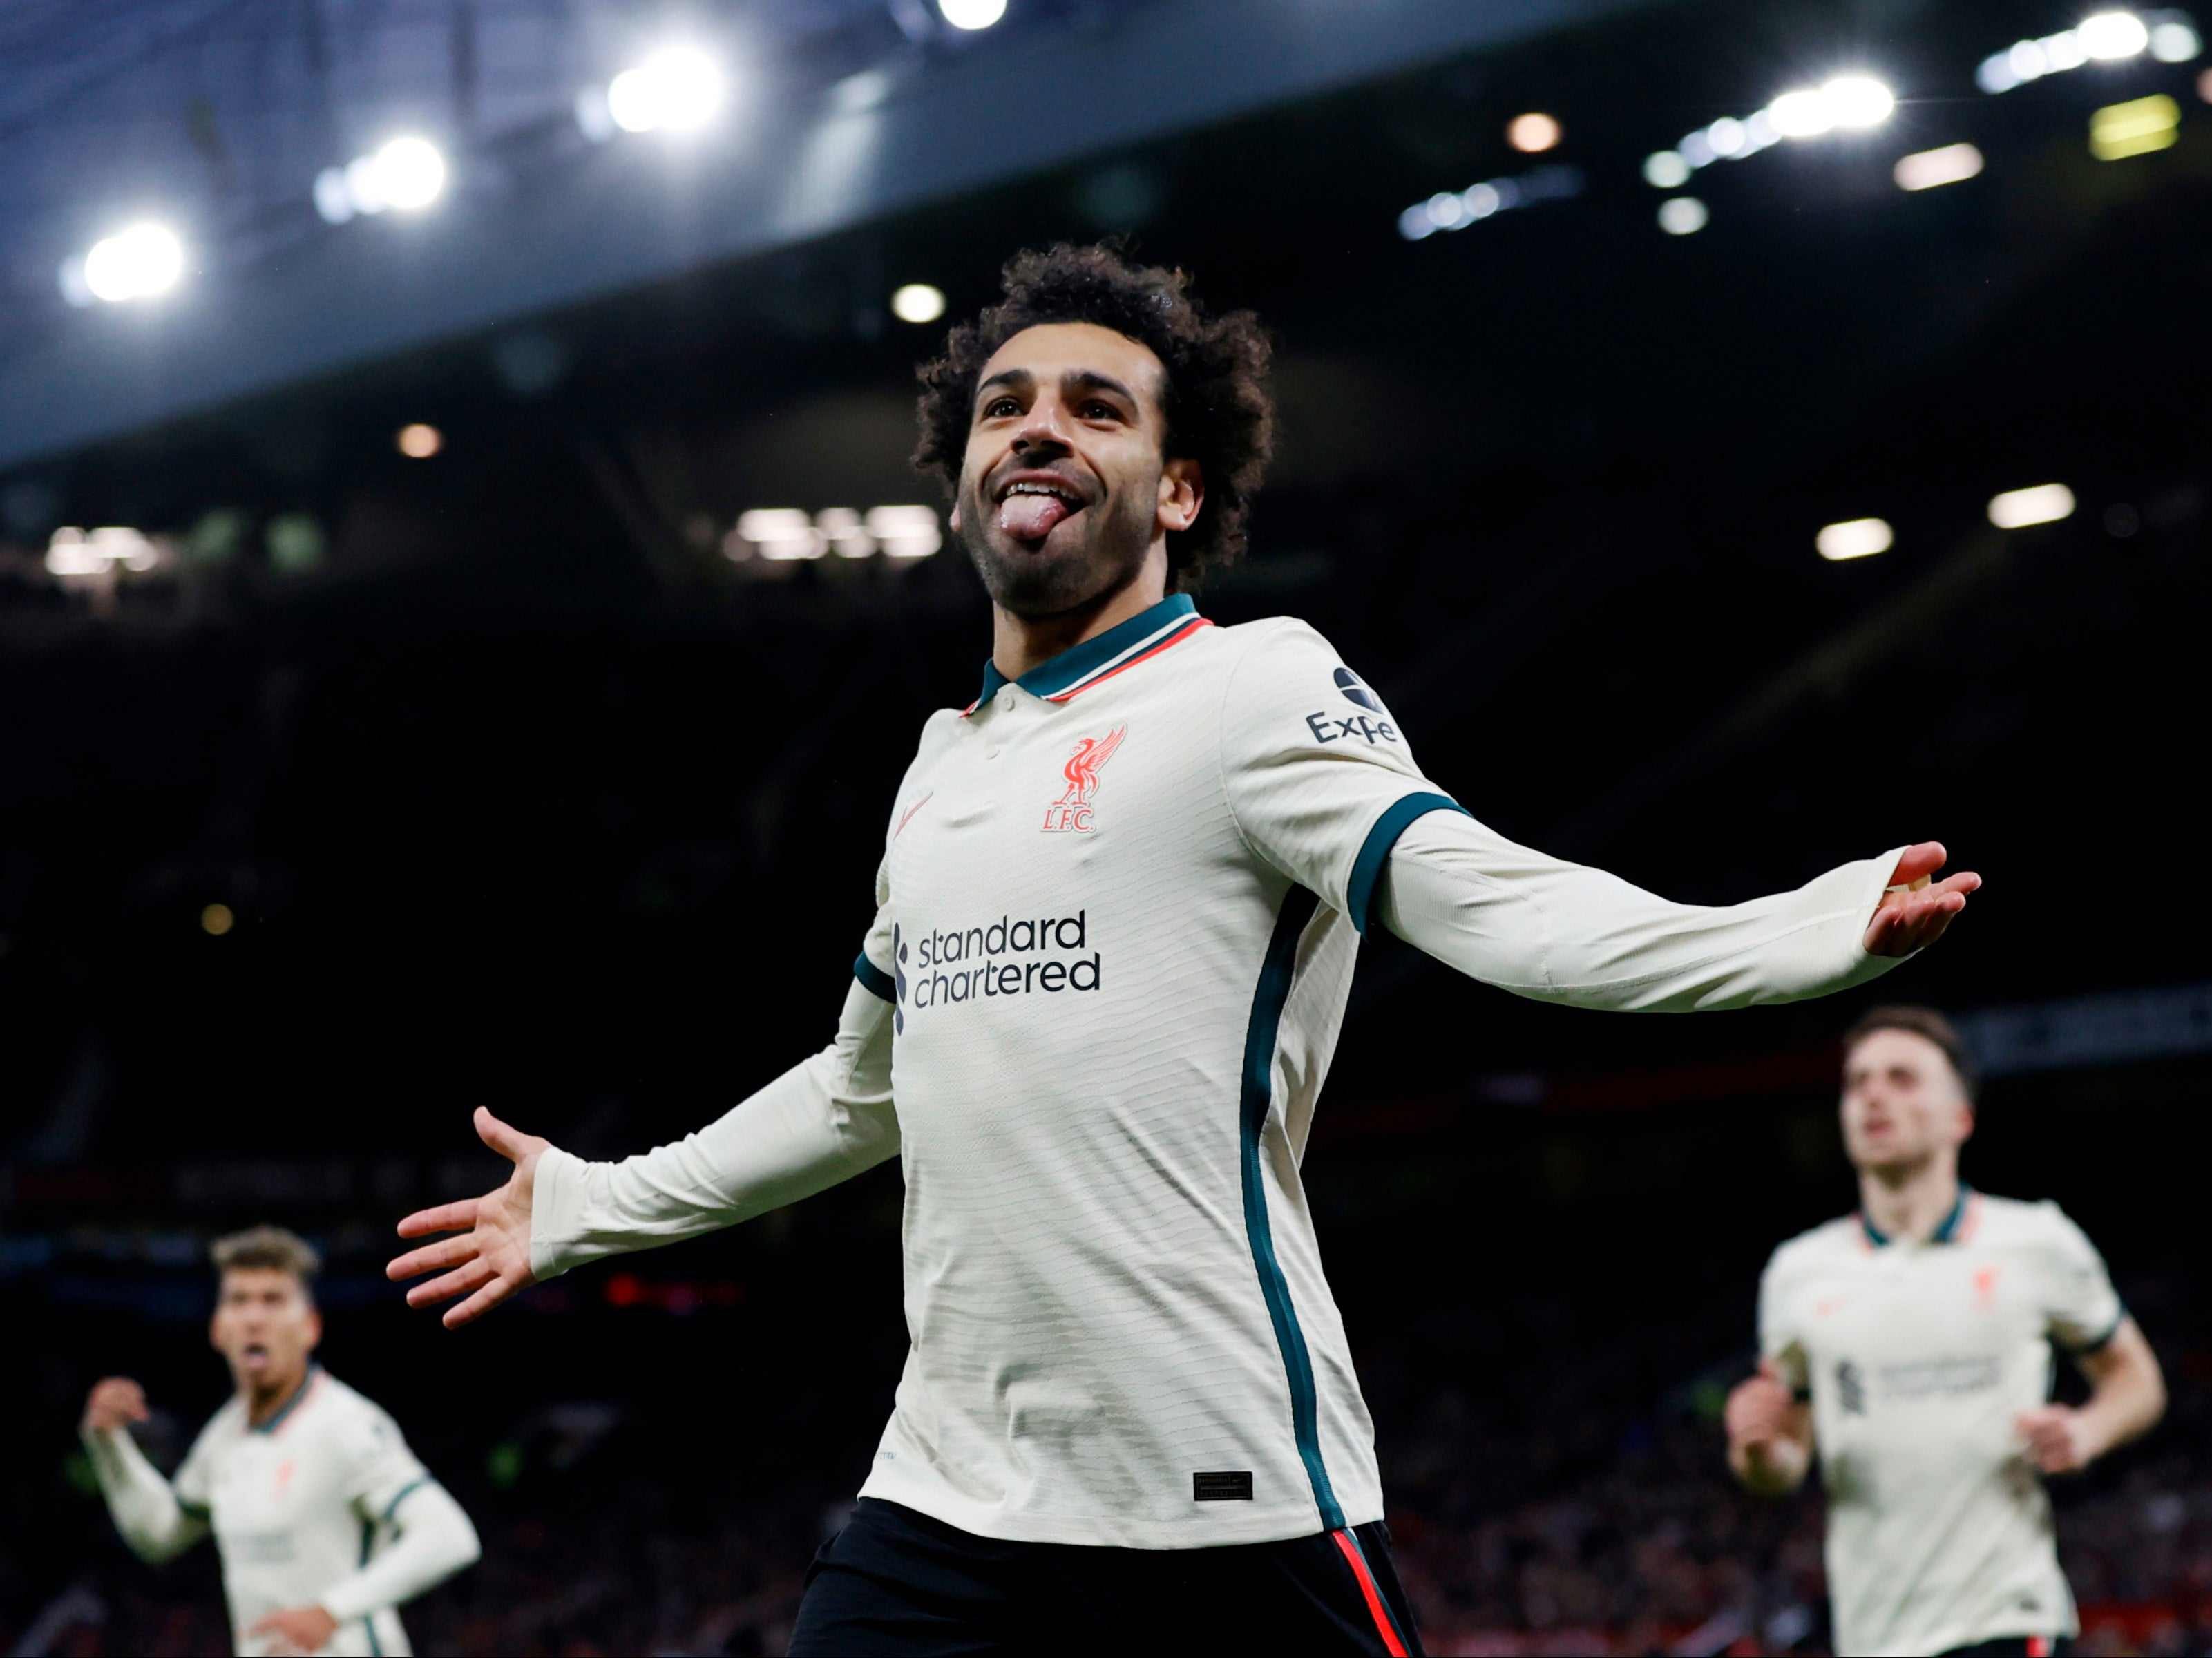 Mohamed Salah netted three times in Liverpool’s 5-0 thrashing of Man United